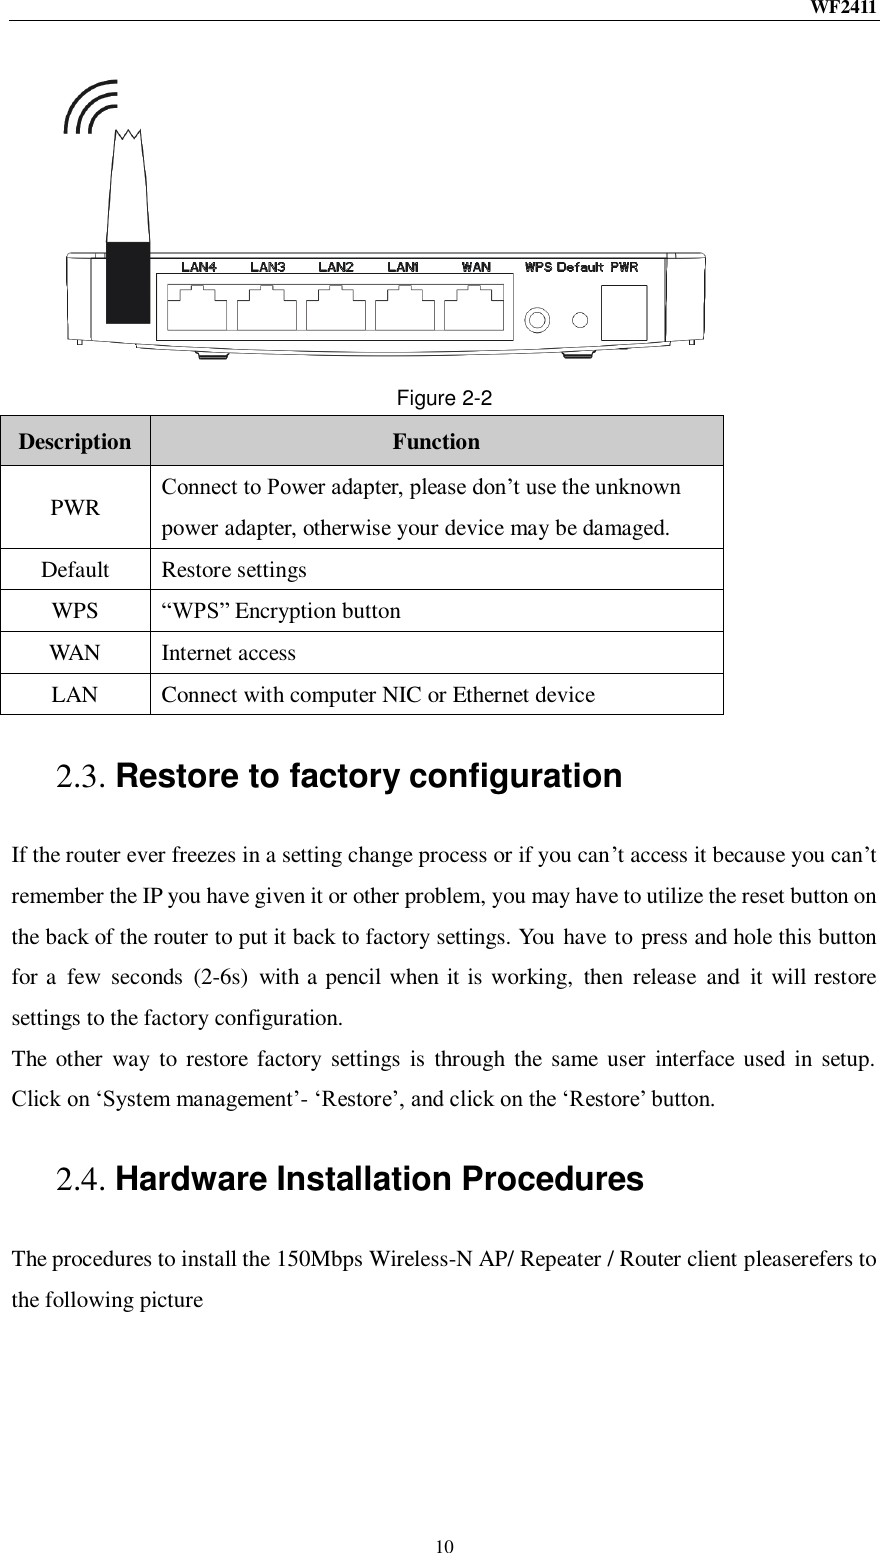 WF2411  10  Figure 2-2 Description Function PWR Connect to Power adapter, please don‟t use the unknown power adapter, otherwise your device may be damaged. Default Restore settings WPS “WPS” Encryption button WAN Internet access LAN Connect with computer NIC or Ethernet device 2.3. Restore to factory configuration If the router ever freezes in a setting change process or if you can‟t access it because you can‟t remember the IP you have given it or other problem, you may have to utilize the reset button on the back of the router to put it back to factory settings. You have to press and hole this button for a  few  seconds  (2-6s)  with a pencil when it is working,  then  release  and  it will restore settings to the factory configuration. The  other  way to  restore factory settings  is  through the same user  interface  used  in setup. Click on „System management‟- „Restore‟, and click on the „Restore‟ button. 2.4. Hardware Installation Procedures The procedures to install the 150Mbps Wireless-N AP/ Repeater / Router client pleaserefers to the following picture 